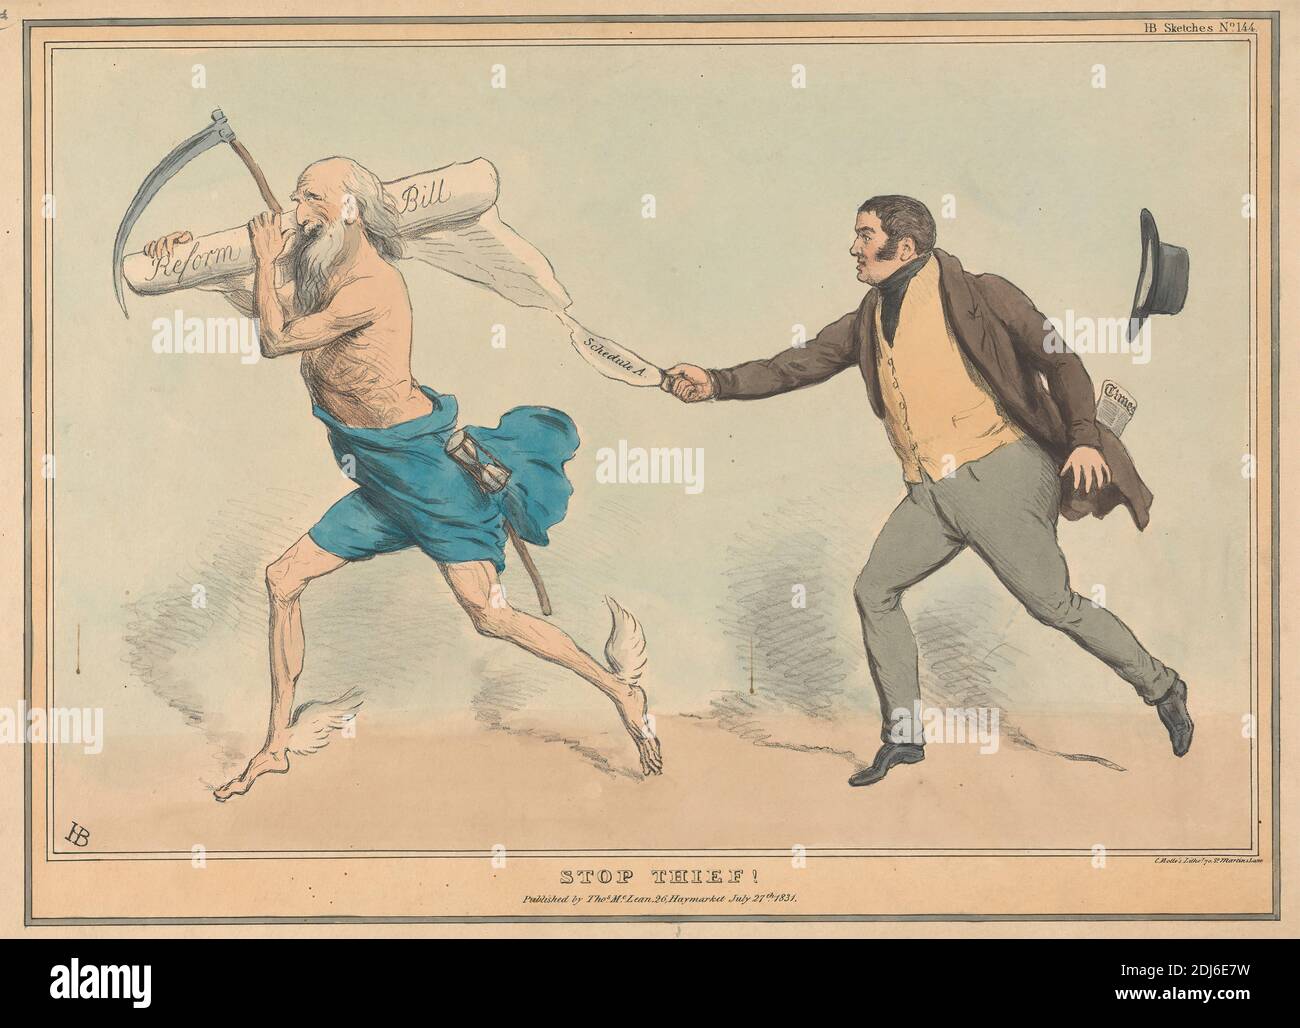 Stop Thief!, Print made by John Doyle ('H.B.'), 1797–1868, Irish, Printed by Charles E. P. Motte, 1785–1836, French, Published by Thomas McLean, 1788–1875, British, 1831, Lithograph, hand-colored on moderately thick, smooth, beige wove paper, Sheet: 11 3/4 x 17 3/8 inches (29.8 x 44.1 cm), Image: 9 3/16 x 13 9/16 inches (23.3 x 34.5 cm), and Image: 9 1/16 x 13 9/16 inches (23 x 34.5 cm), bill, caricature, chancellor, chasing, exchequer, historical subject, hourglass, legislation, newspaper, parody, political, politician, running, sandglass, satire, satirical, scrolls, scythe, sketches, thief Stock Photo